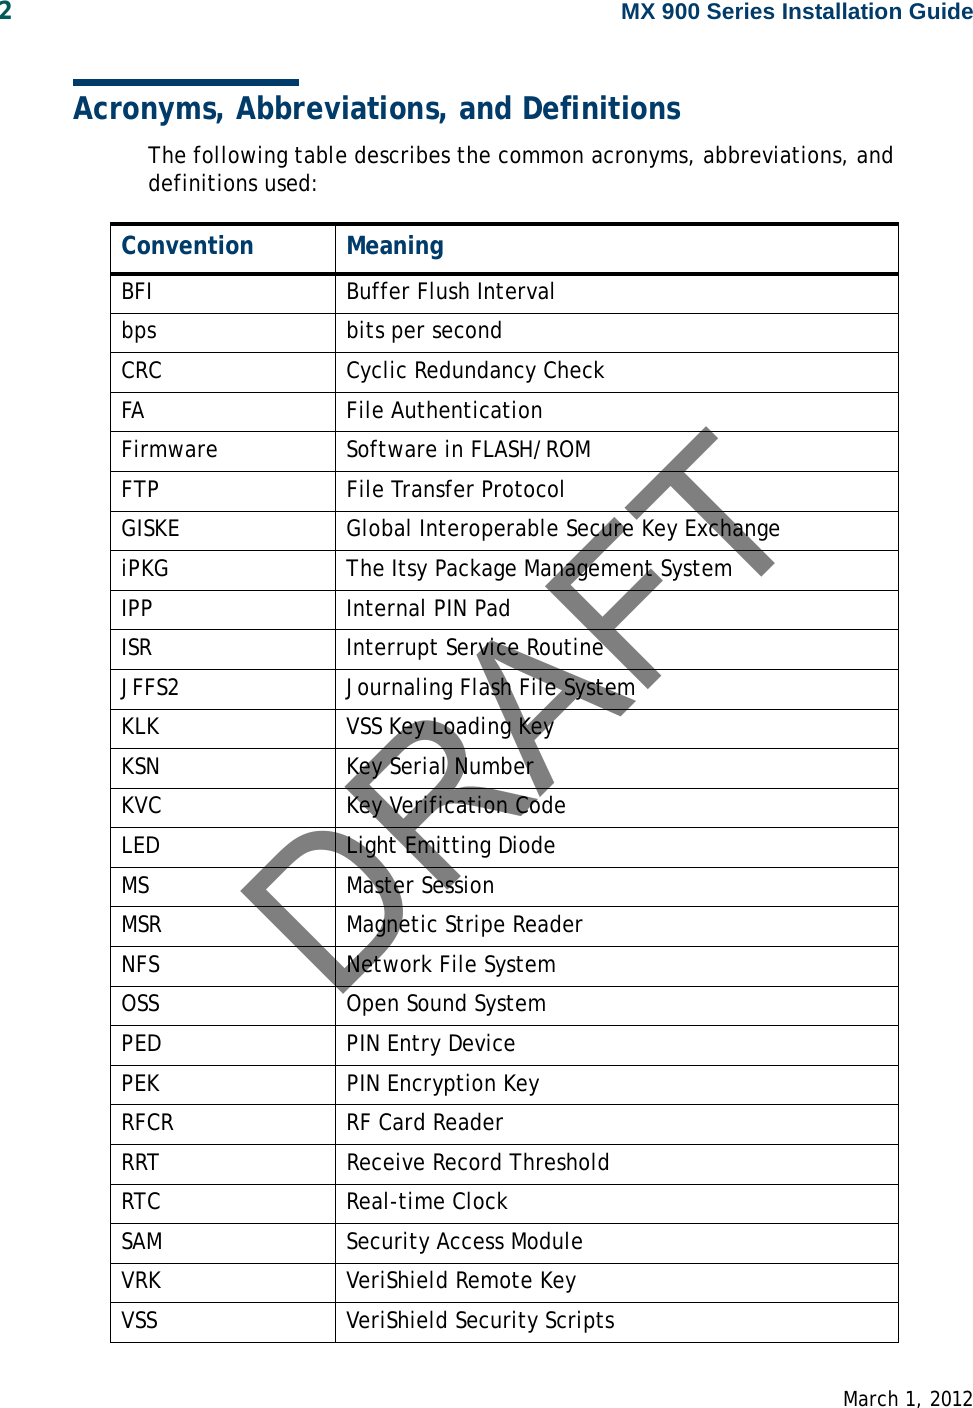 DRAFT2MX 900 Series Installation GuideMarch 1, 2012Acronyms, Abbreviations, and DefinitionsThe following table describes the common acronyms, abbreviations, and definitions used:Convention MeaningBFI Buffer Flush Intervalbps bits per secondCRC Cyclic Redundancy CheckFA File AuthenticationFirmware Software in FLASH/ROMFTP File Transfer ProtocolGISKE Global Interoperable Secure Key ExchangeiPKG The Itsy Package Management SystemIPP Internal PIN PadISR Interrupt Service RoutineJFFS2 Journaling Flash File SystemKLK VSS Key Loading KeyKSN Key Serial NumberKVC Key Verification CodeLED Light Emitting DiodeMS Master SessionMSR Magnetic Stripe ReaderNFS Network File SystemOSS Open Sound SystemPED PIN Entry DevicePEK PIN Encryption KeyRFCR RF Card ReaderRRT Receive Record ThresholdRTC Real-time ClockSAM Security Access ModuleVRK  VeriShield Remote KeyVSS VeriShield Security Scripts